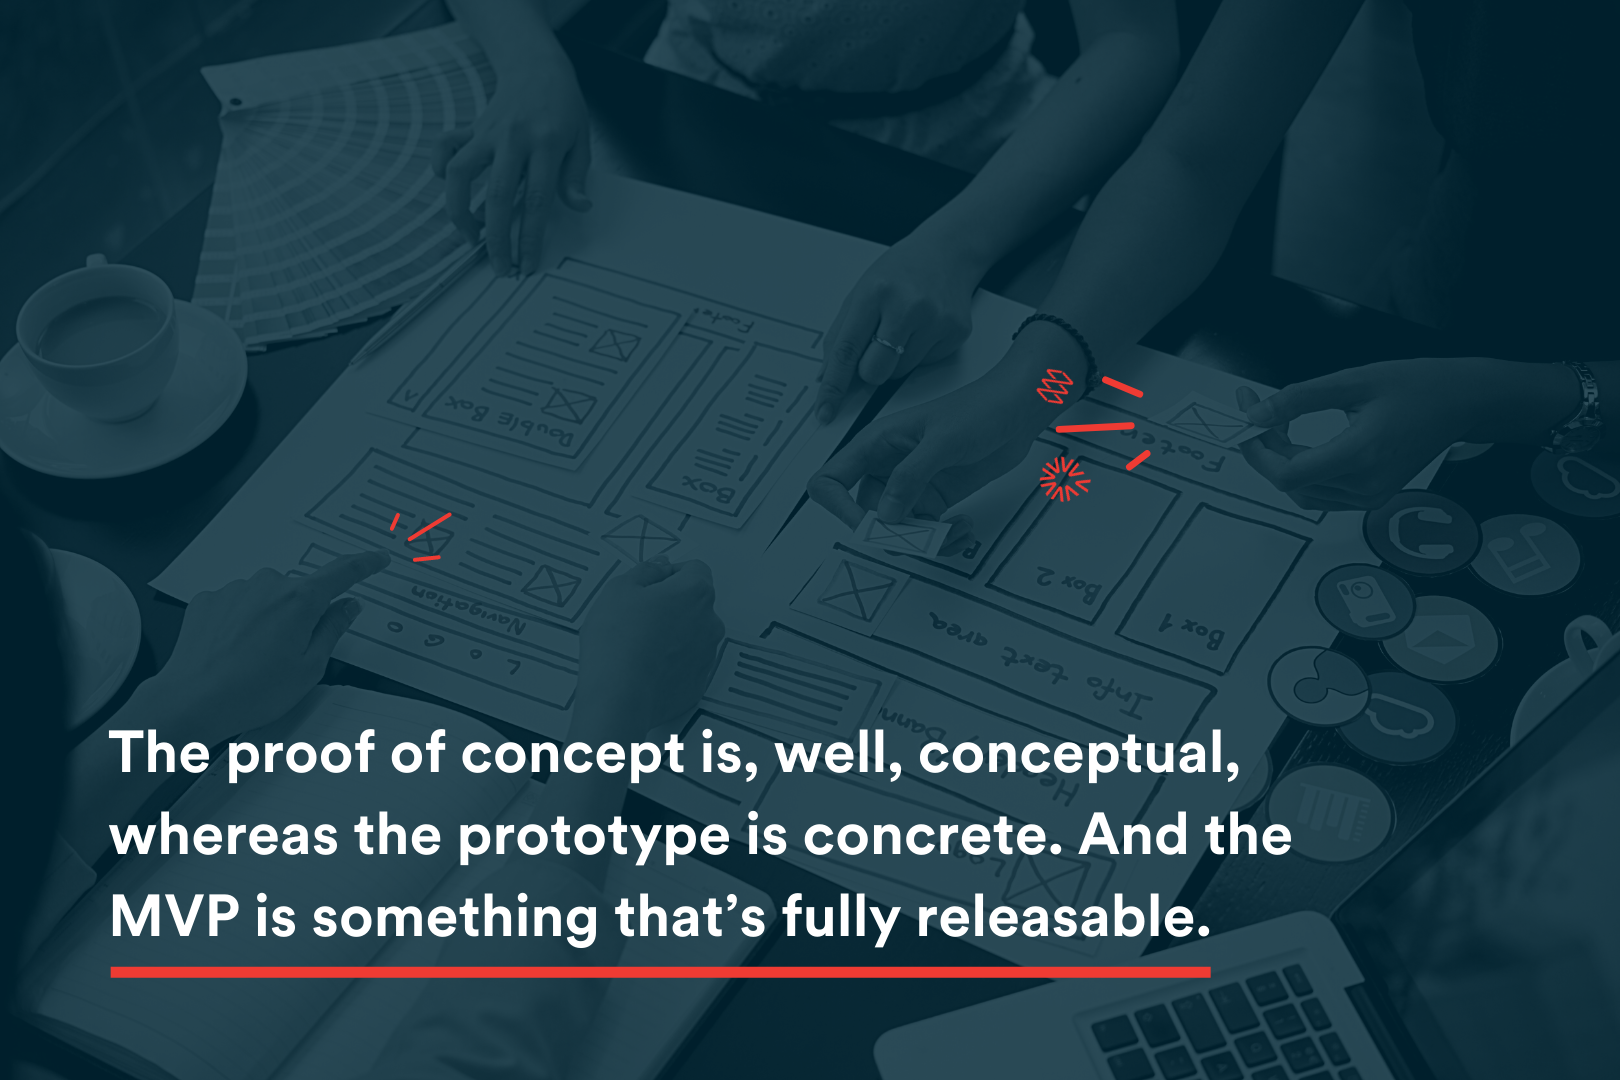 Blog Image - The proof of concept is, well, conceptual, whereas the prototype is concrete. And the MVP is something that’s fully releasable.